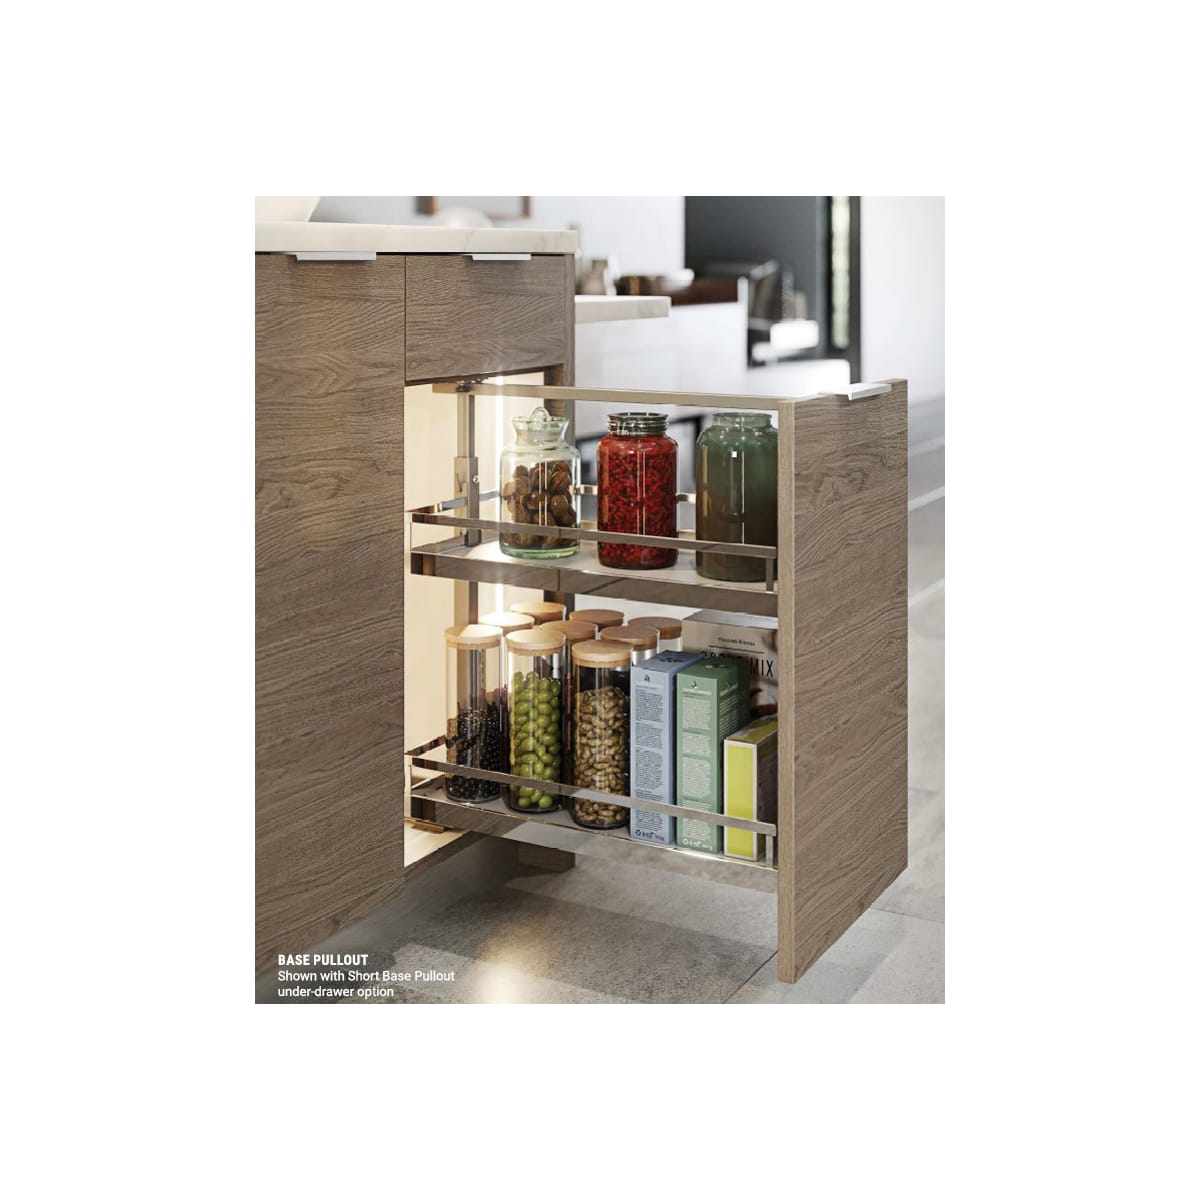 Rev-A-Shelf 5330-33BCSC 5330 Series Pull Out Base Organizer with One Shelf, Maple